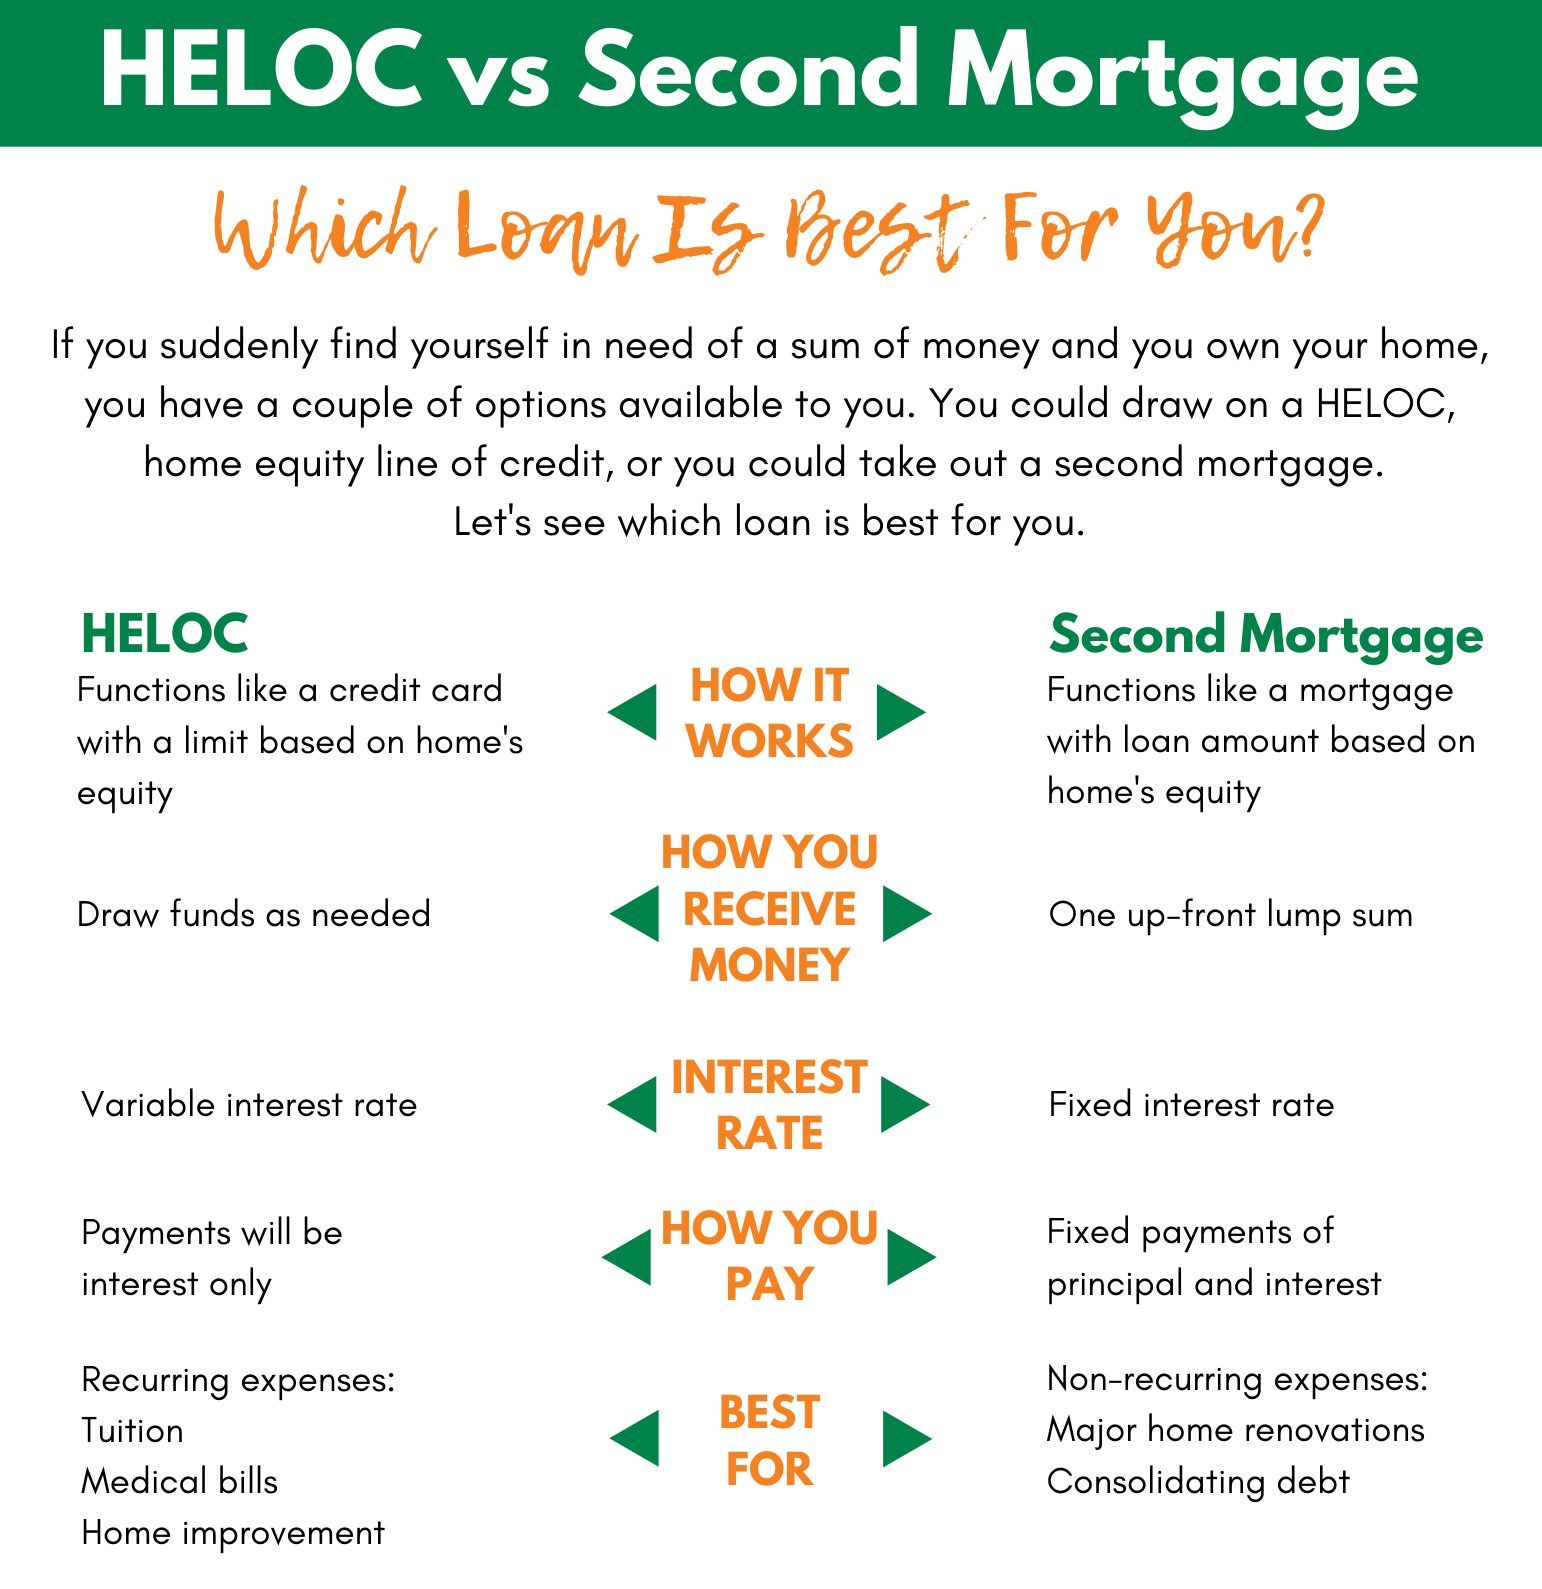 How Long Does Home Equity Loan Take To Process